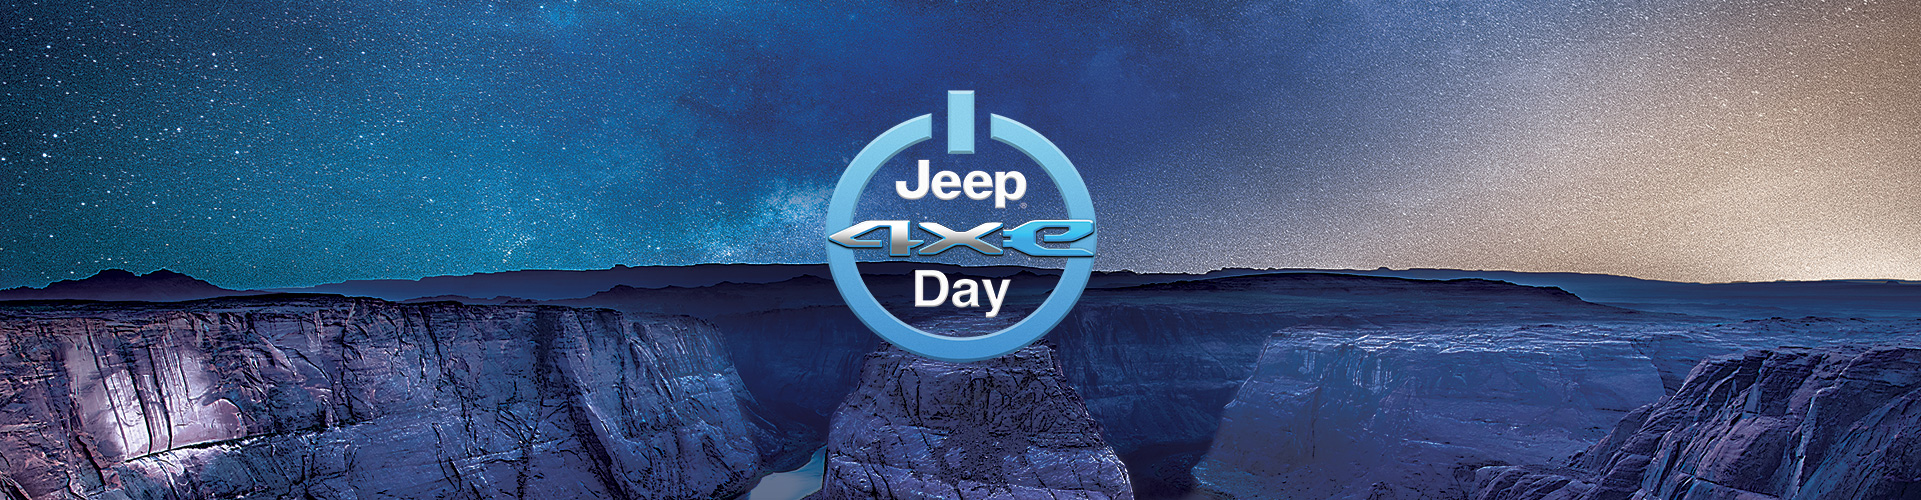 Jeep 4xe Day